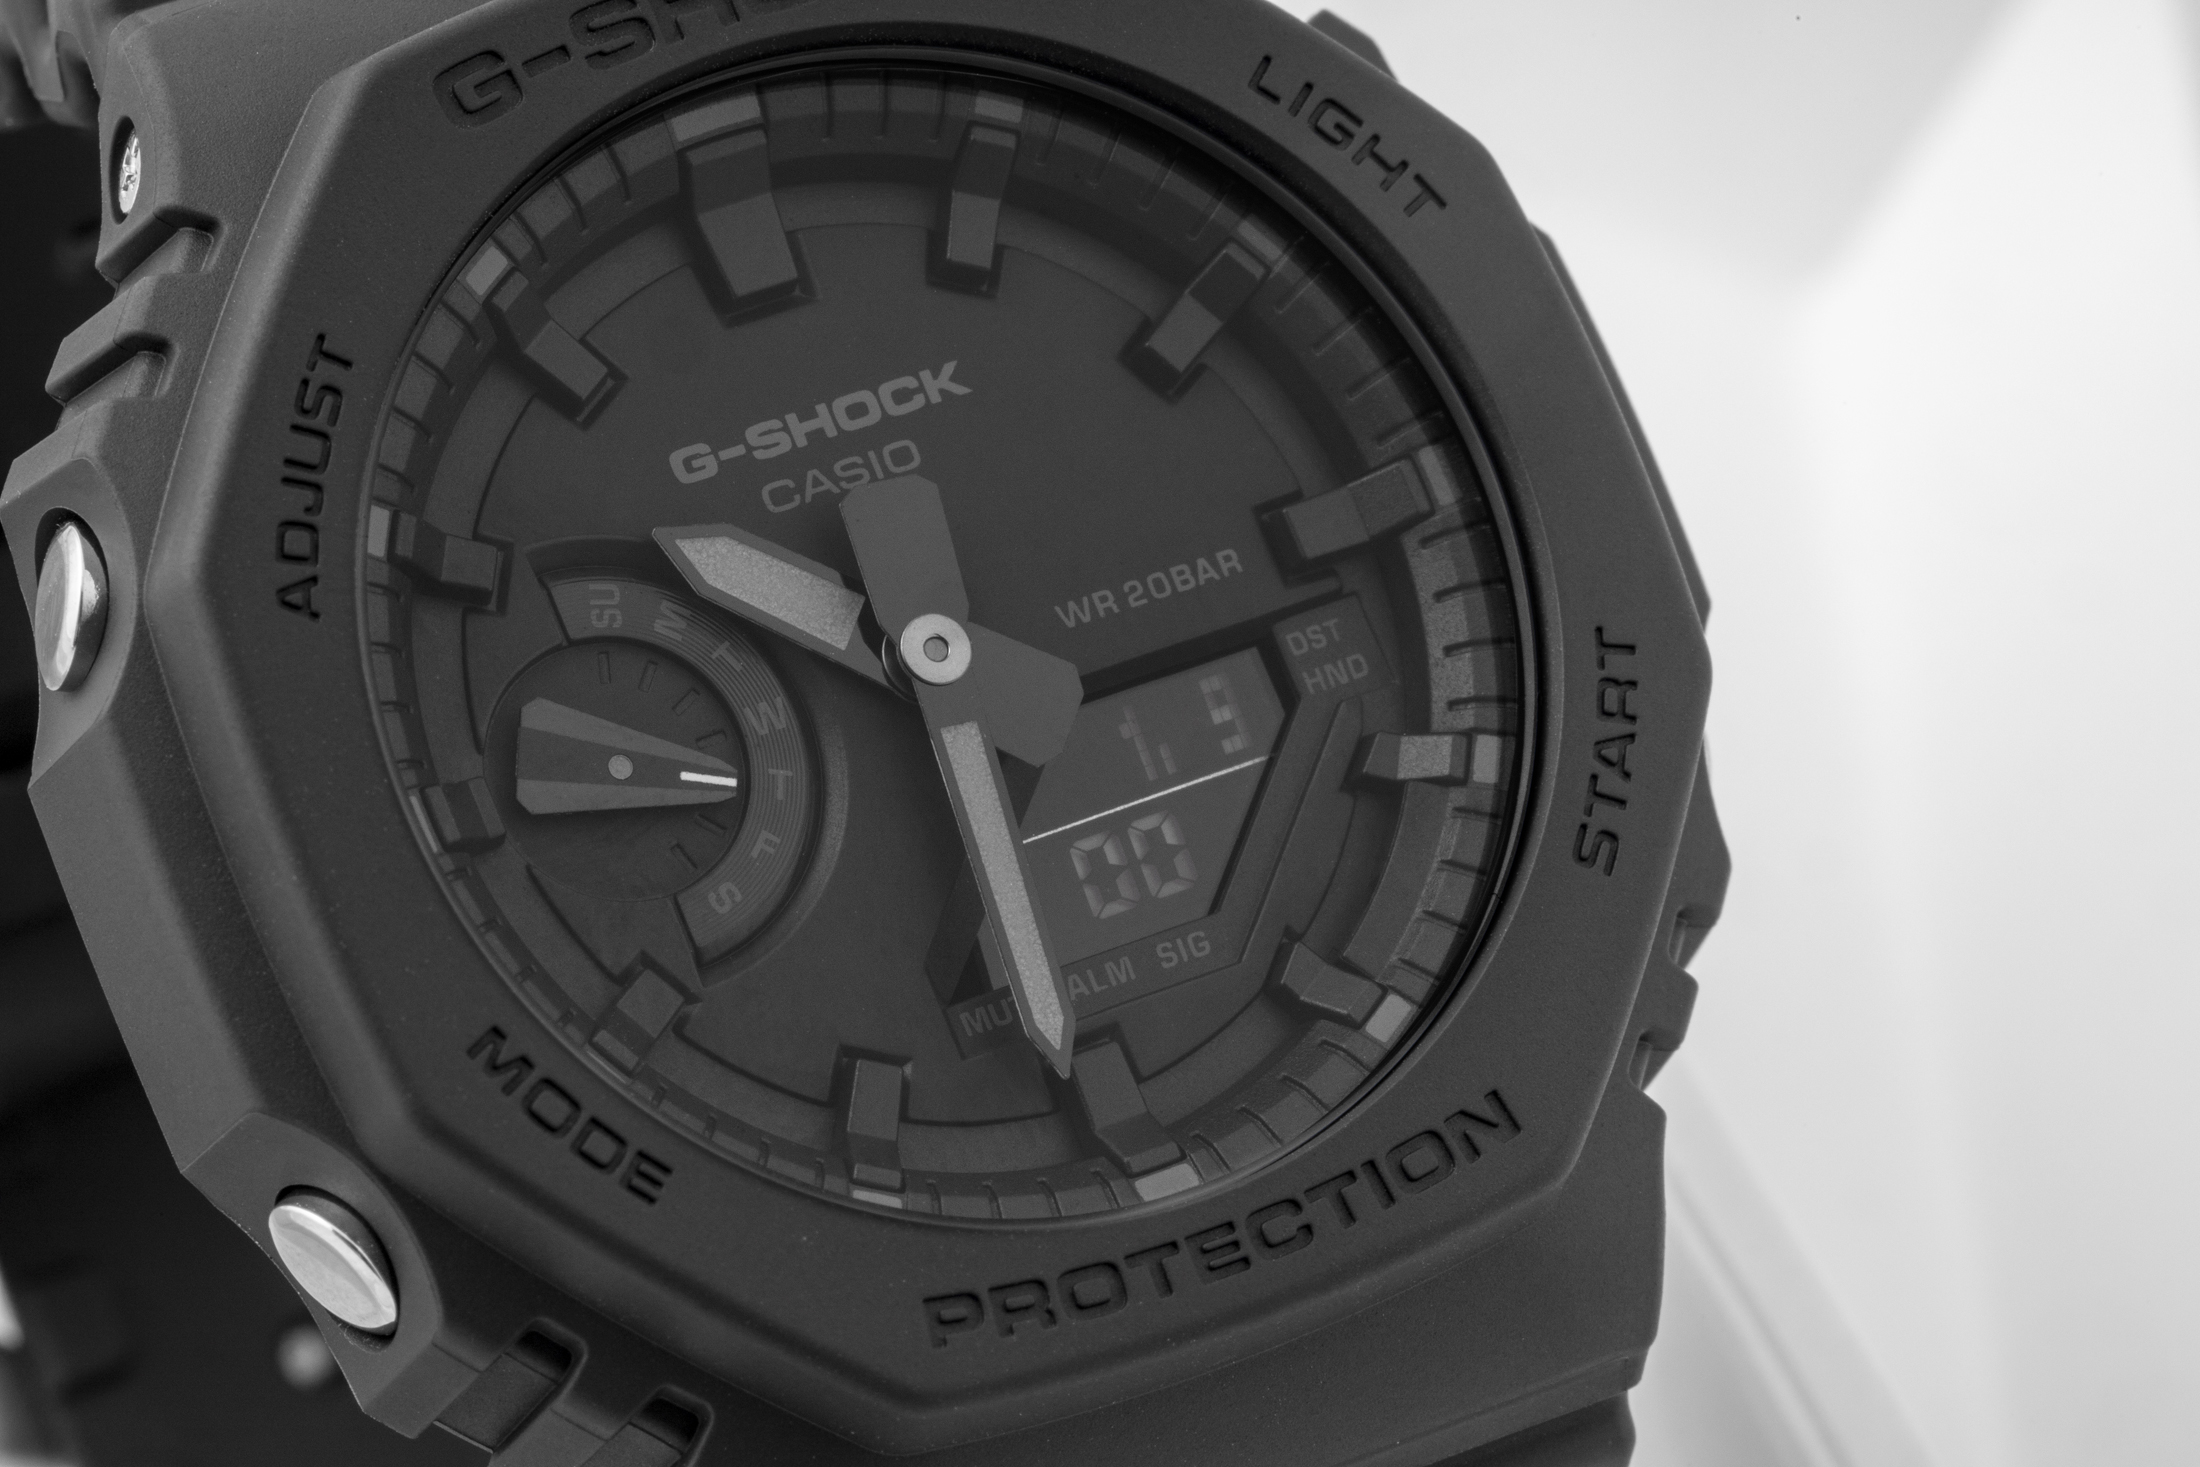 The Value Proposition: カシオ G-SHOCK GA2100-1A1JF 